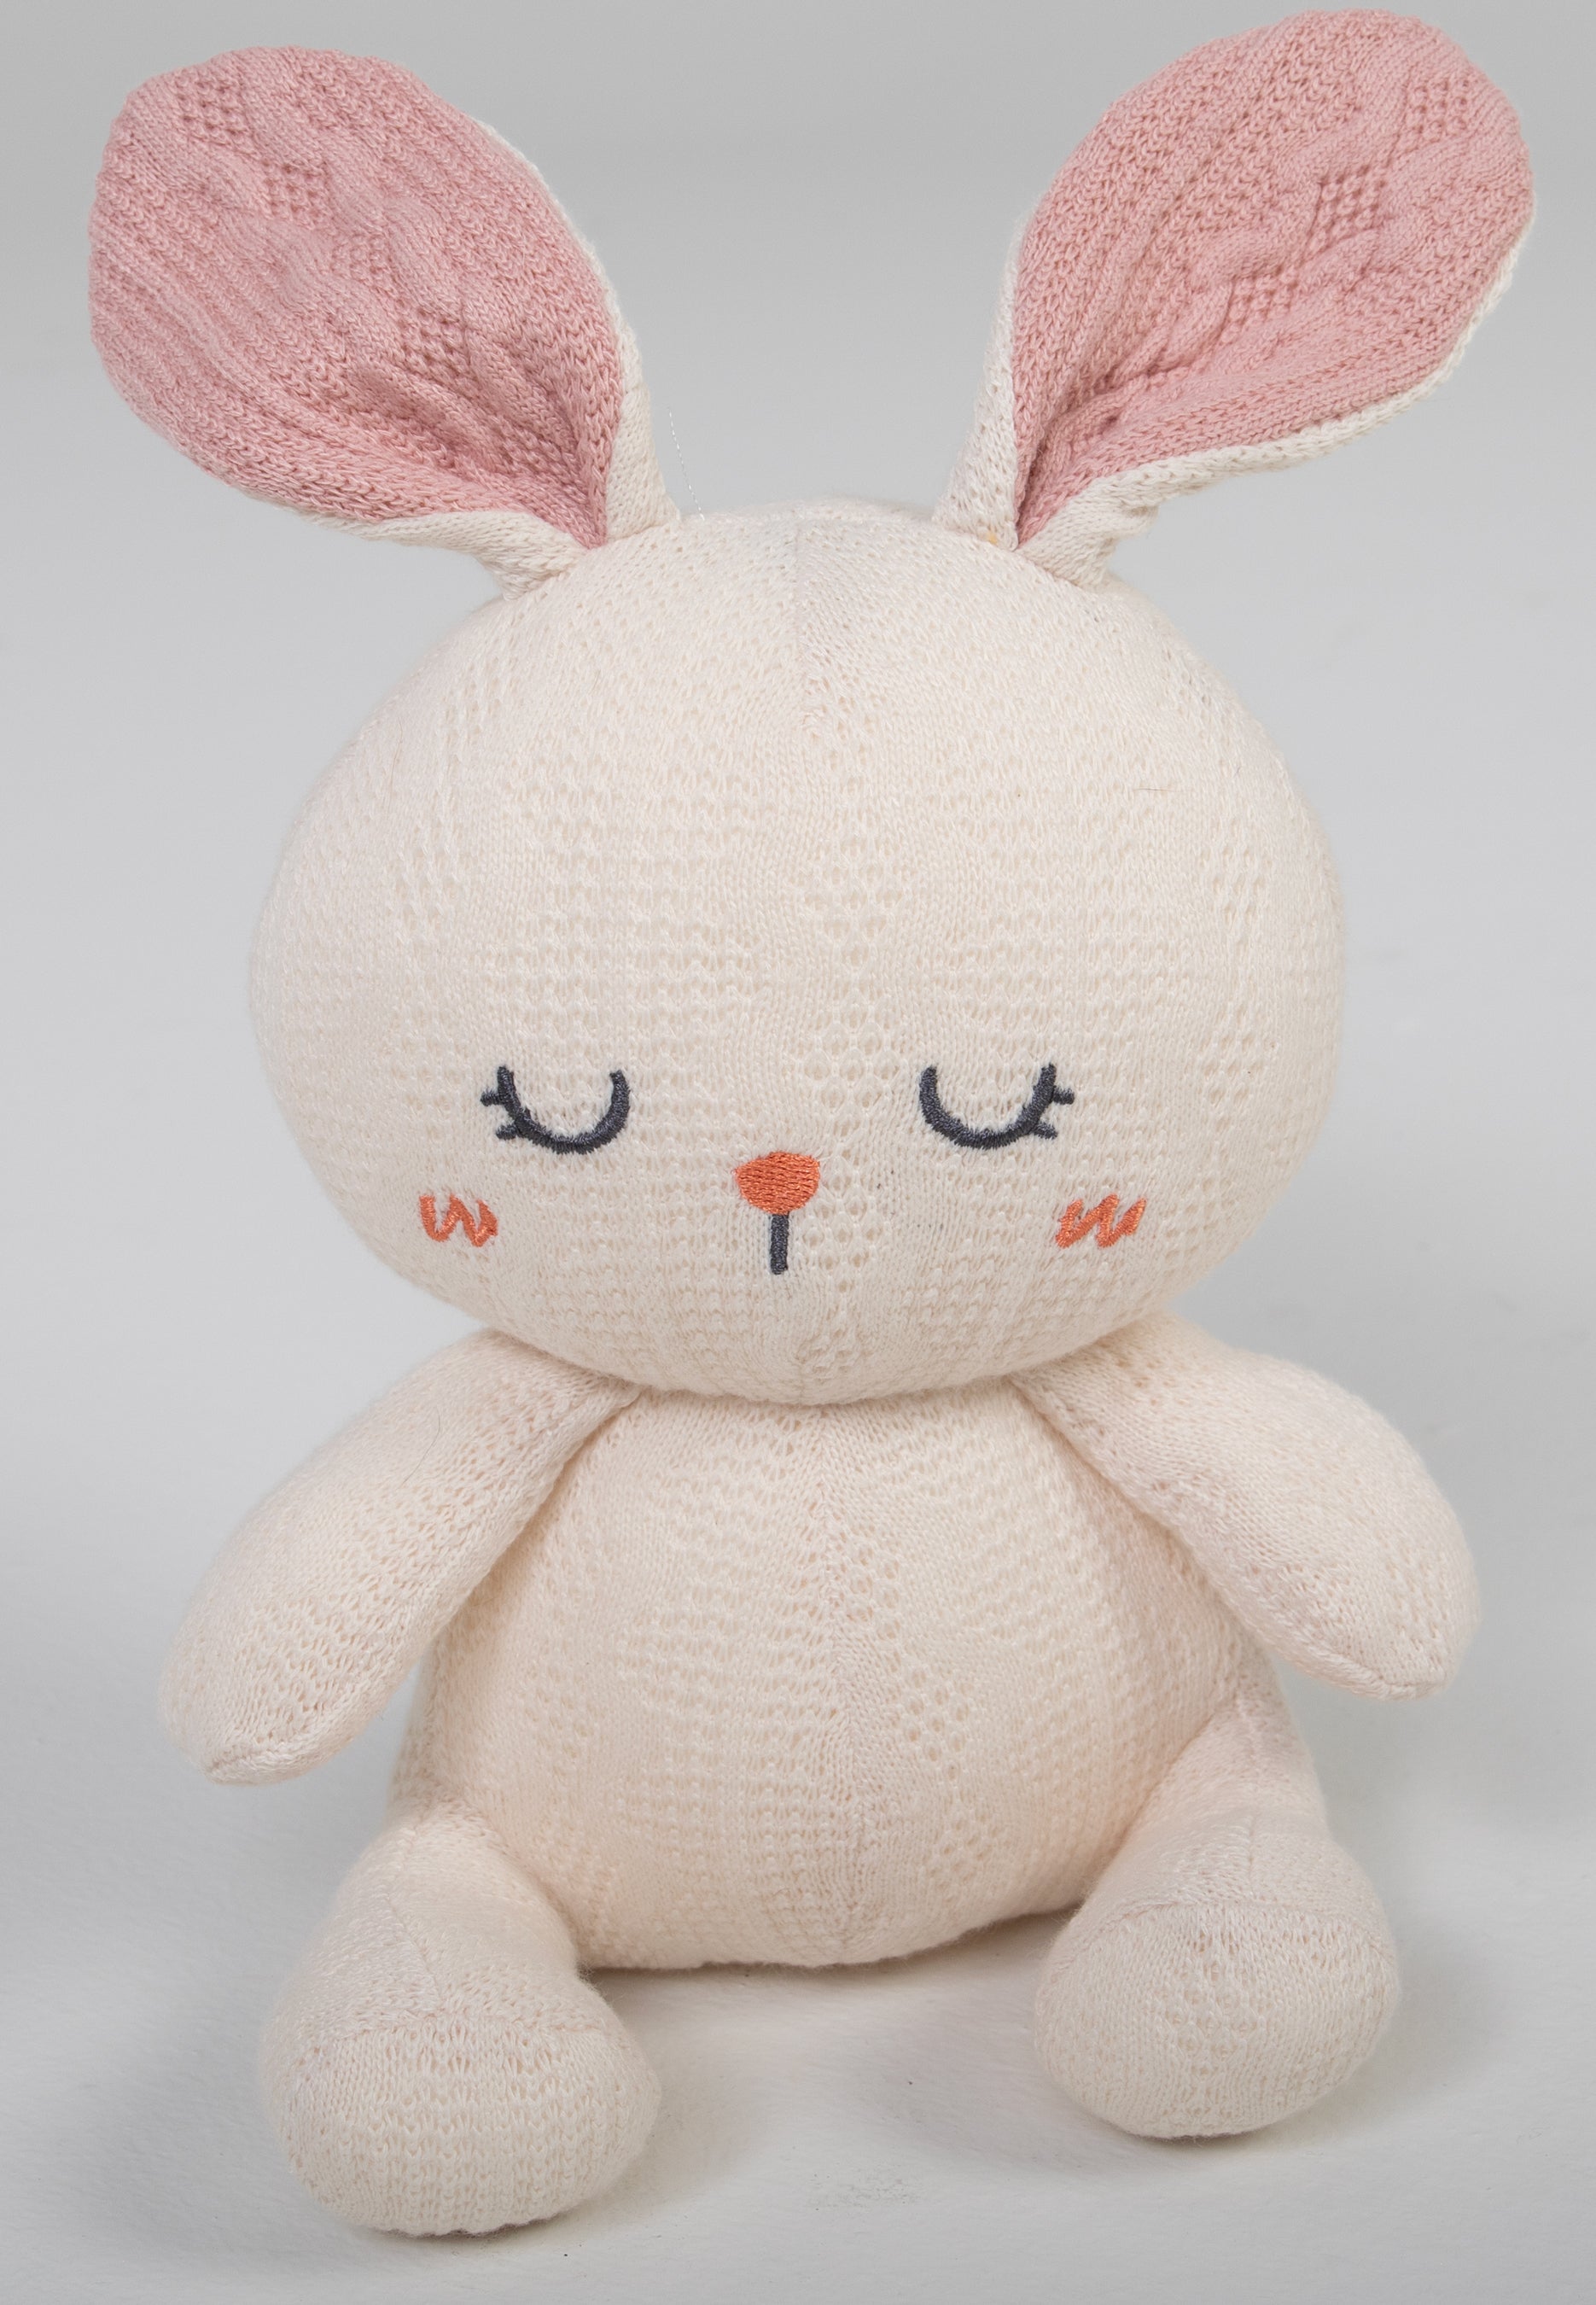 Our Stuffed Bunny is made from the highest quality, ultra-soft materials to ensure a touch that's as gentle as a cloud. Its crochet fabric is a delight to touch, making it an ideal snuggle buddy for bedtime or a comforting friend during playtime. 9" high